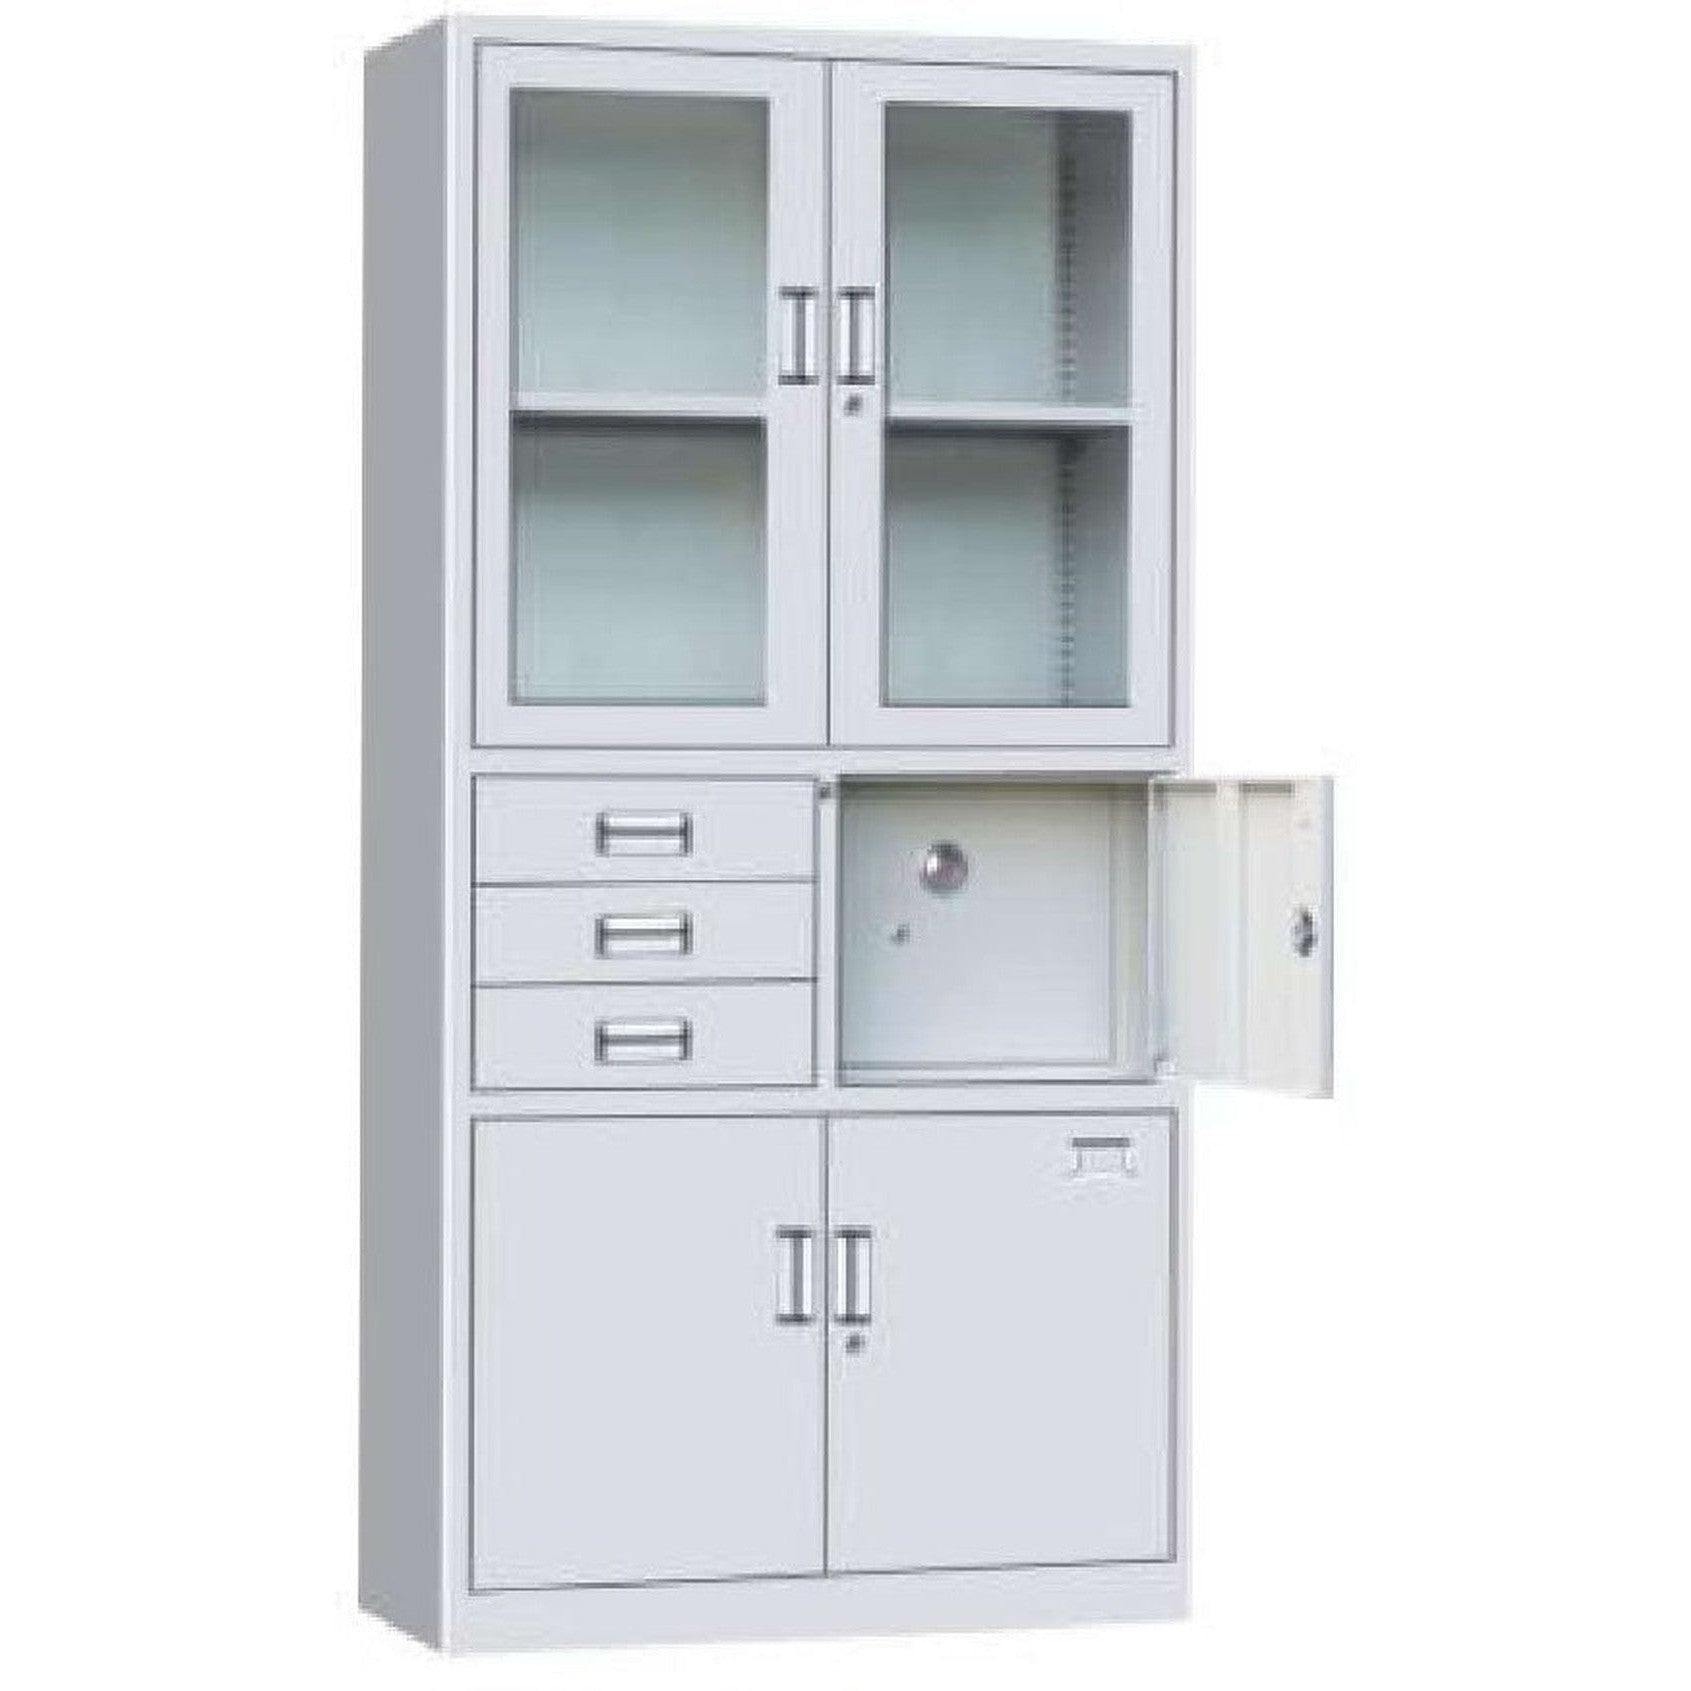 Metal File Cabinet 2 Doors 2 Drawers-Accessories And Organizers-Other-Star Light Kuwait